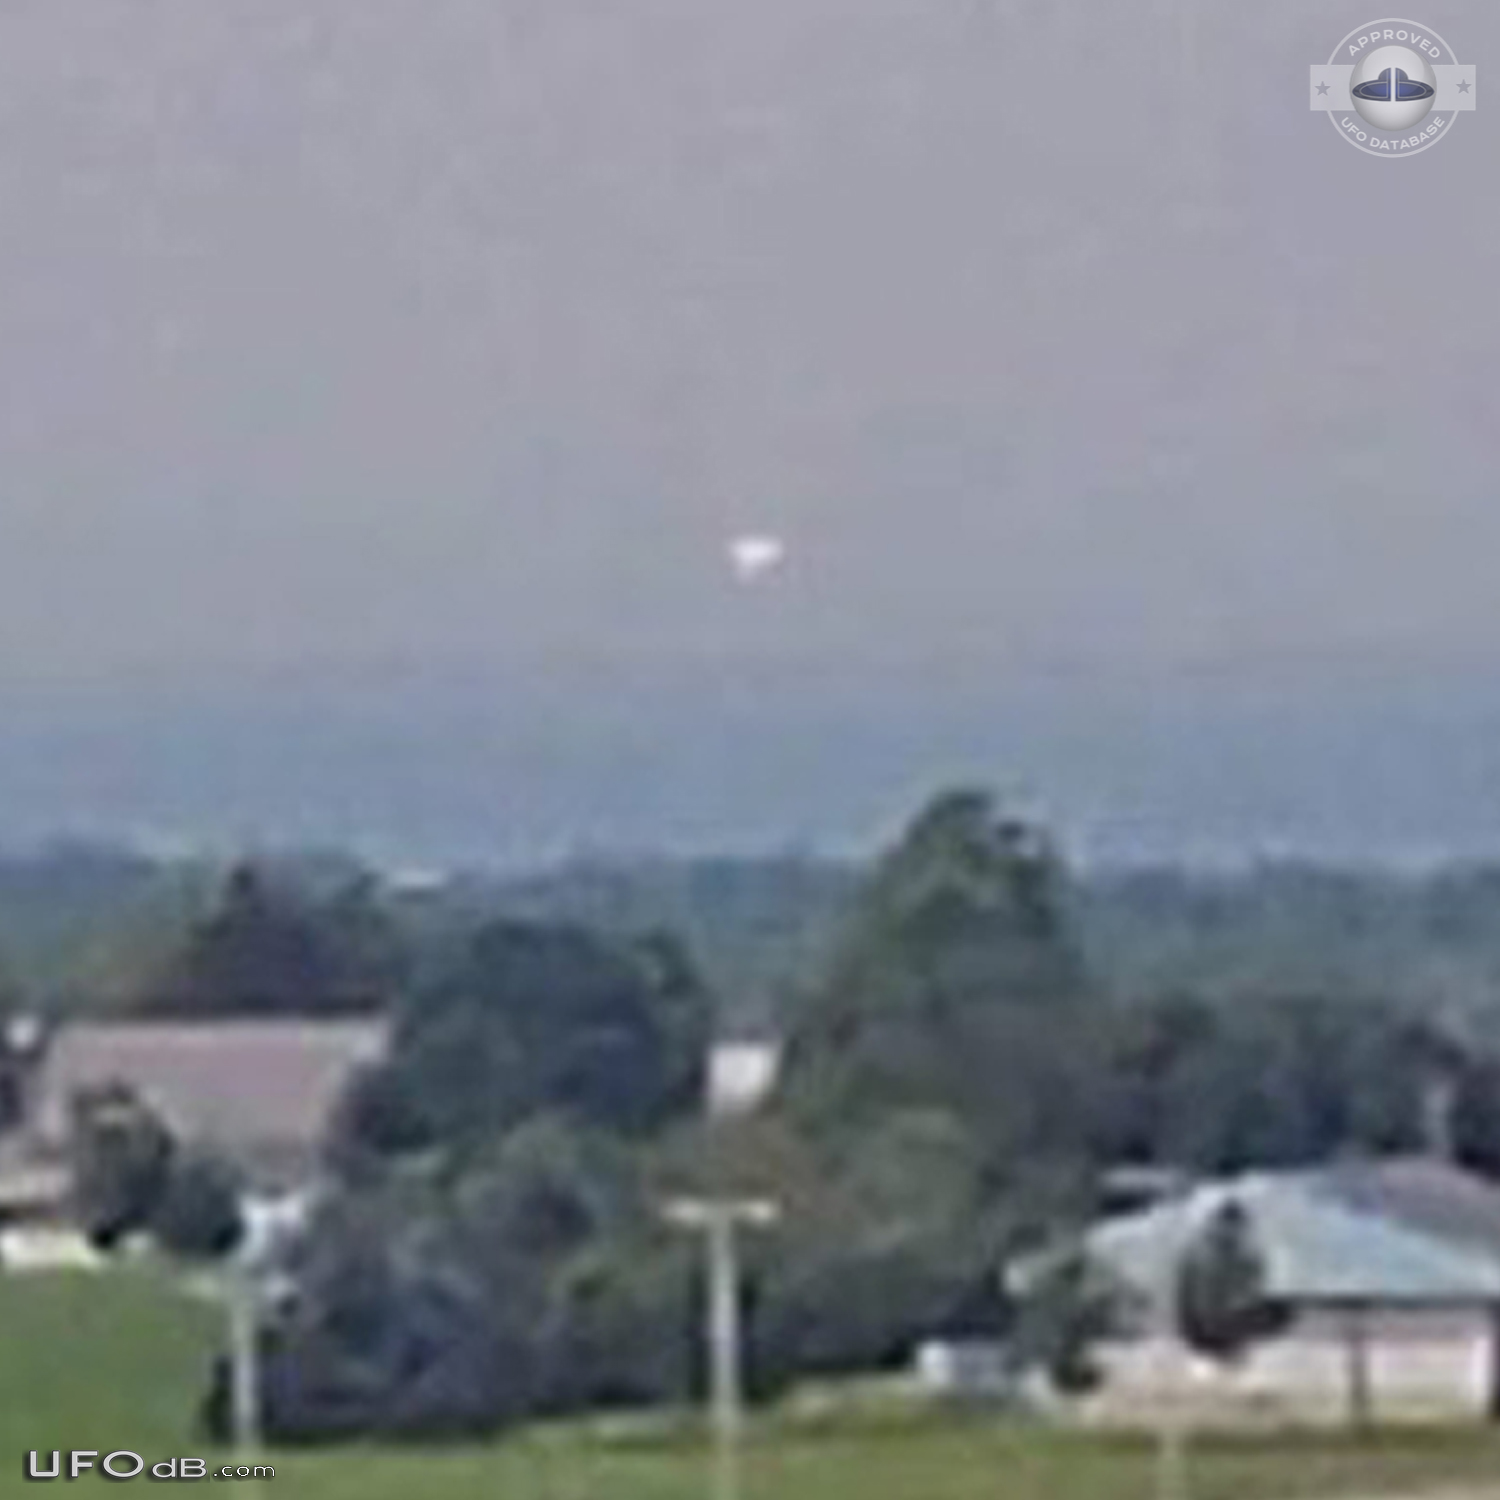 Orange Ball UFO in the sky above St-Gervais in Quebec Canada 2017 UFO Picture #845-3